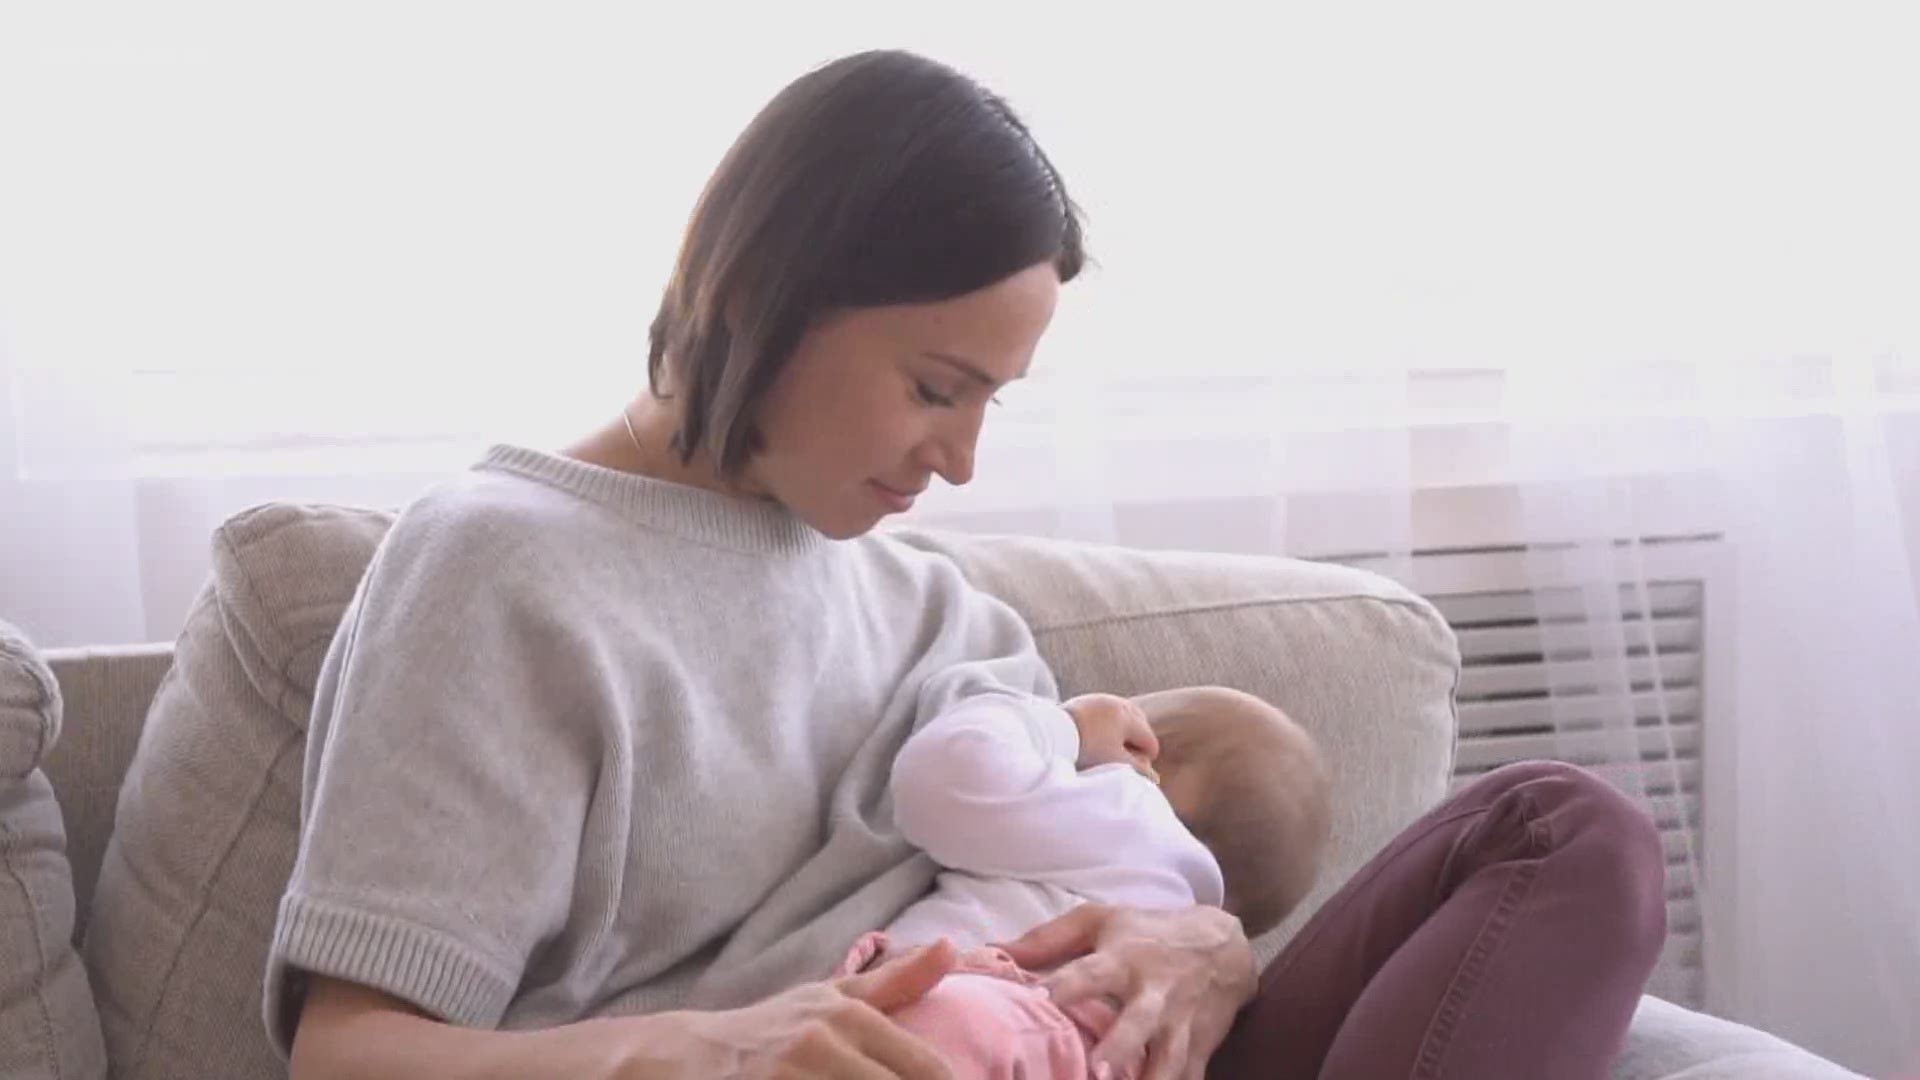 Experts say even if a mother has the virus, breastfeeding benefits outweigh the risks.